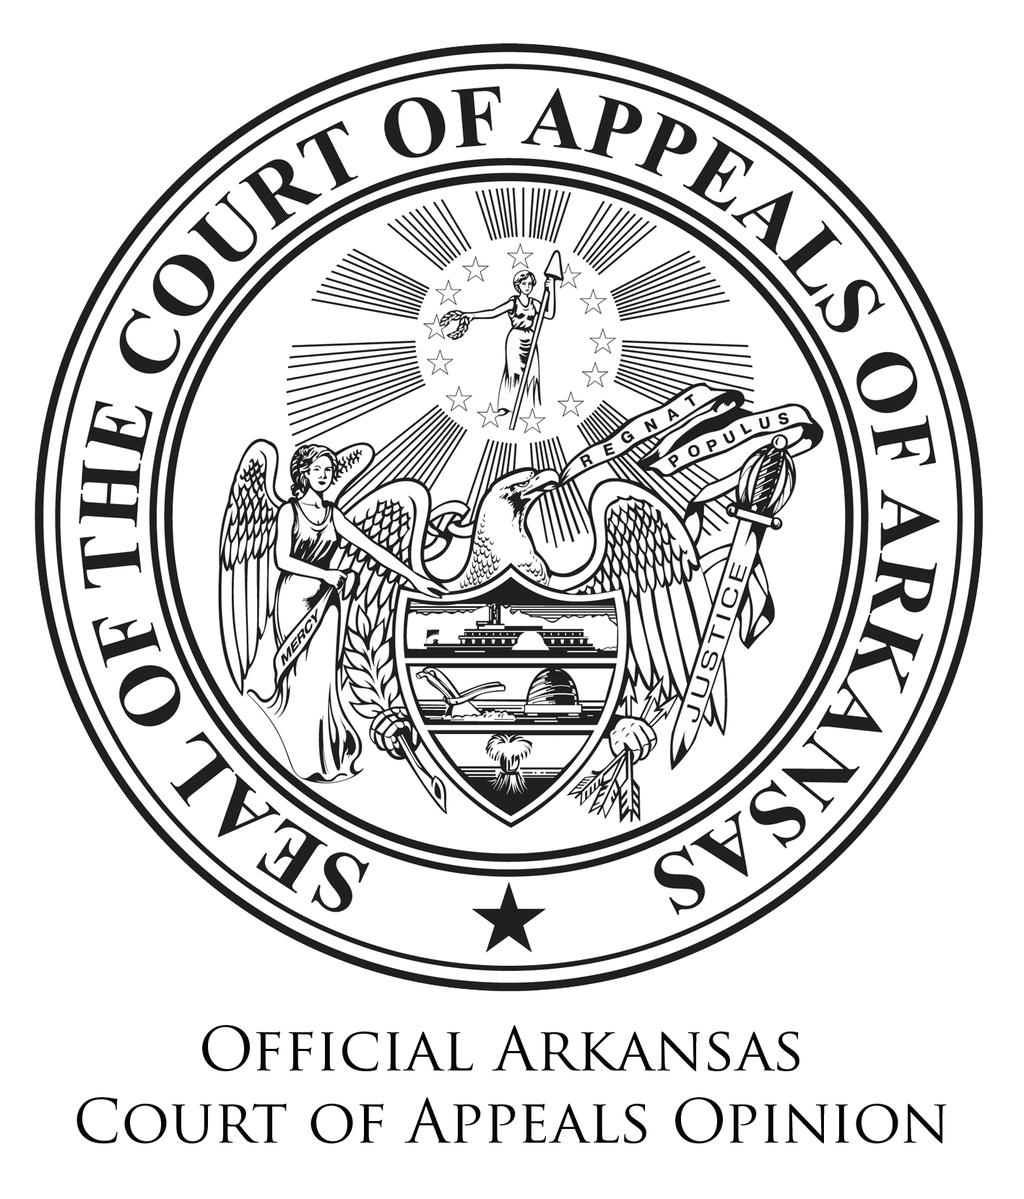 Cite as 2009 Ark. App. 126 (unpublished) ARKANSAS COURT OF APPEALS DIVISION II No. CA 08-642 Opinion Delivered February 25, 2009 LEYON BRATTON APPELLANT V.